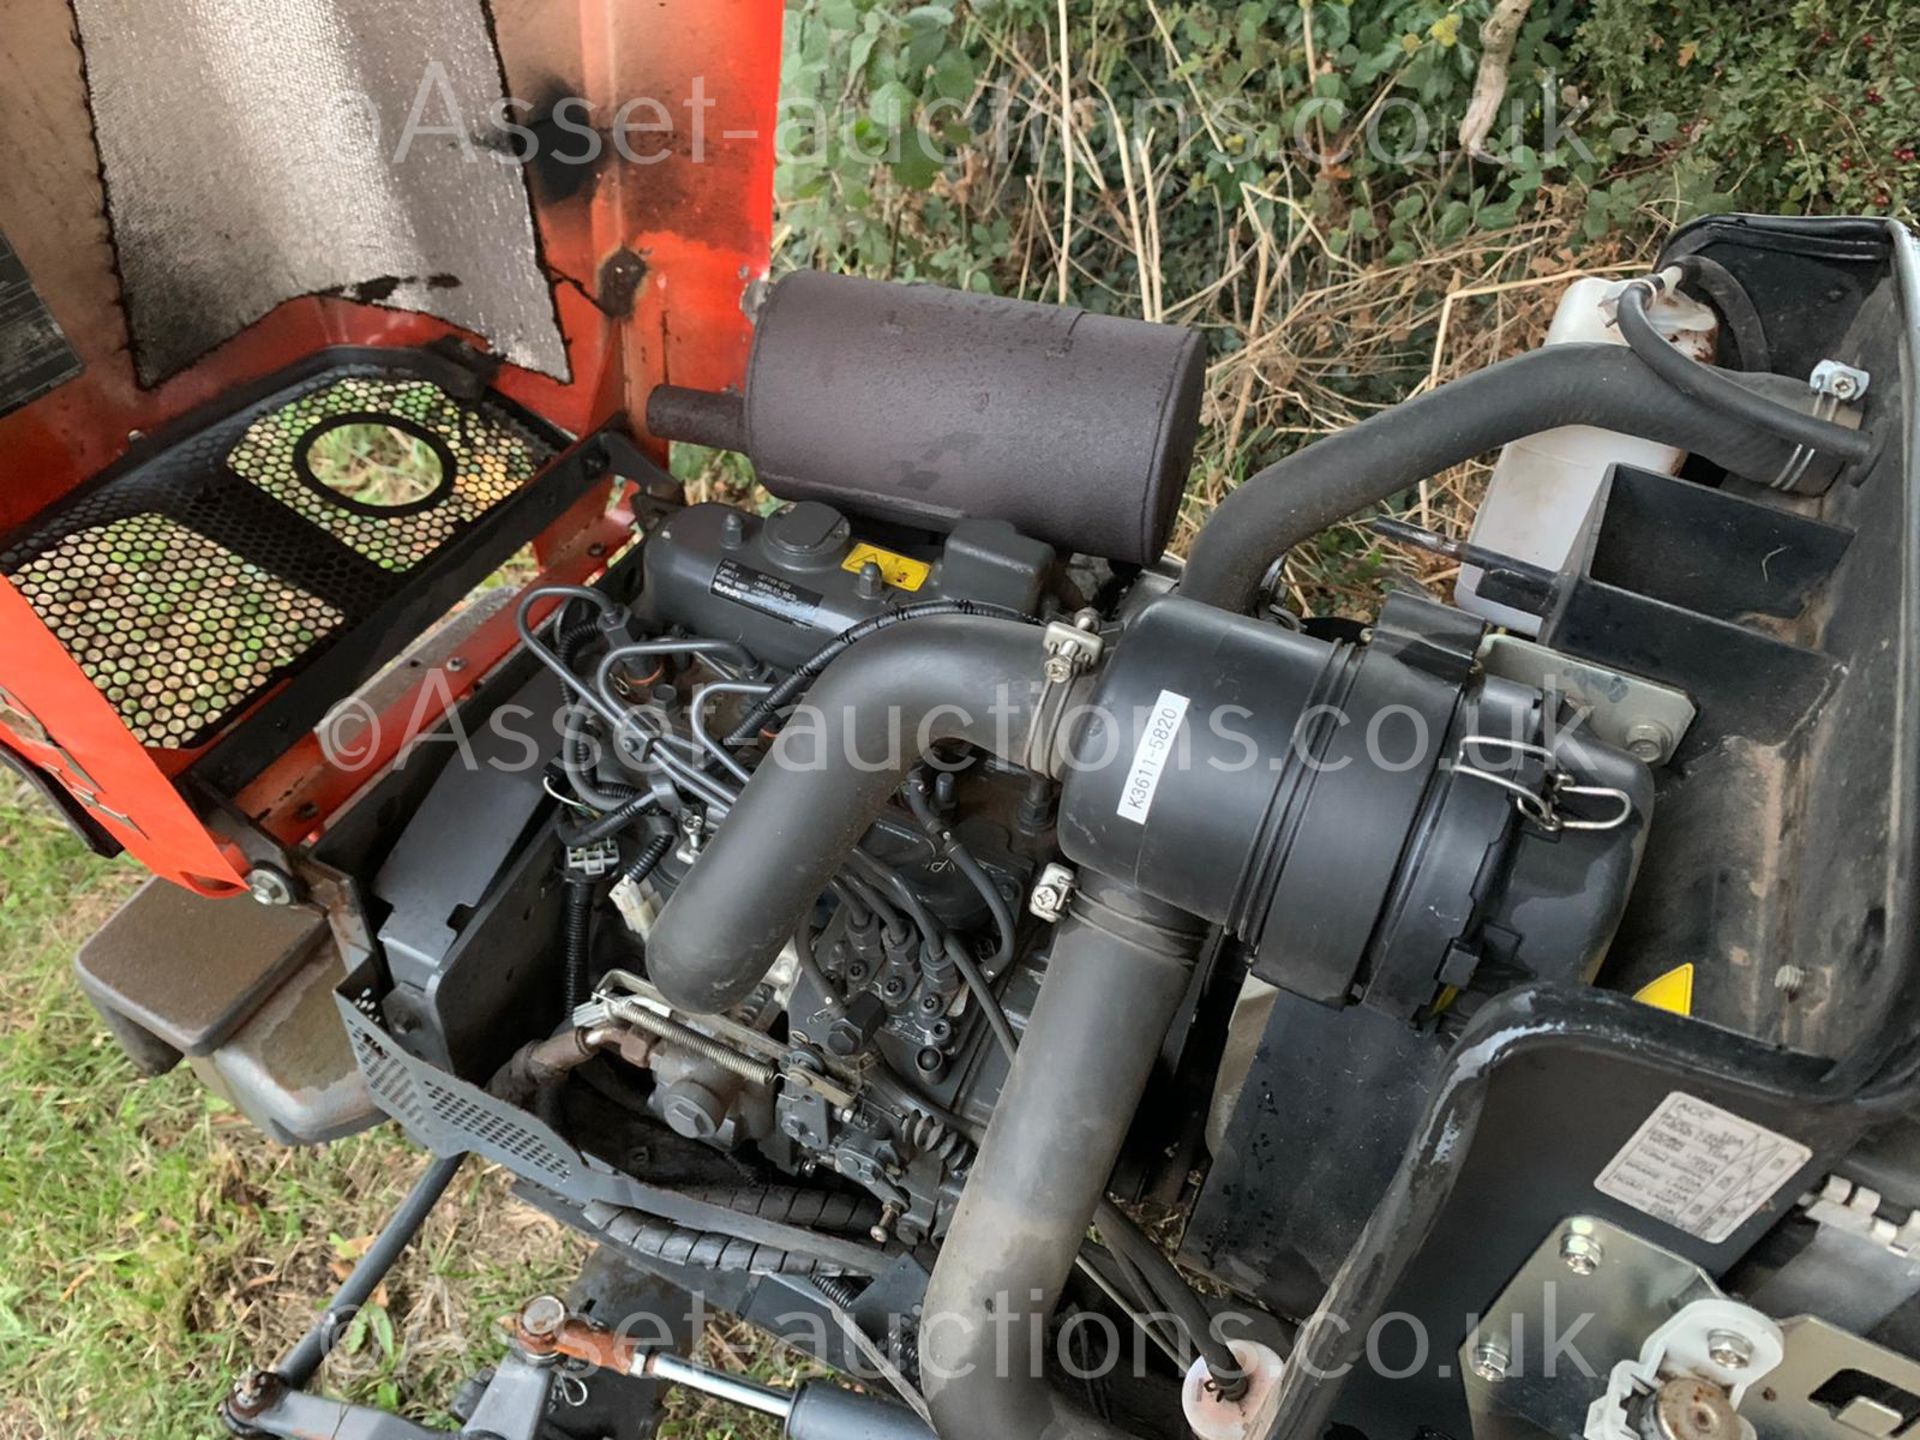 KUBOTA F2880 DIESEL RIDE ON MOWER, RUNS DRIVES AND CUTS, SHOWING A LOW 2640 HOURS *PLUS VAT* - Image 9 of 10